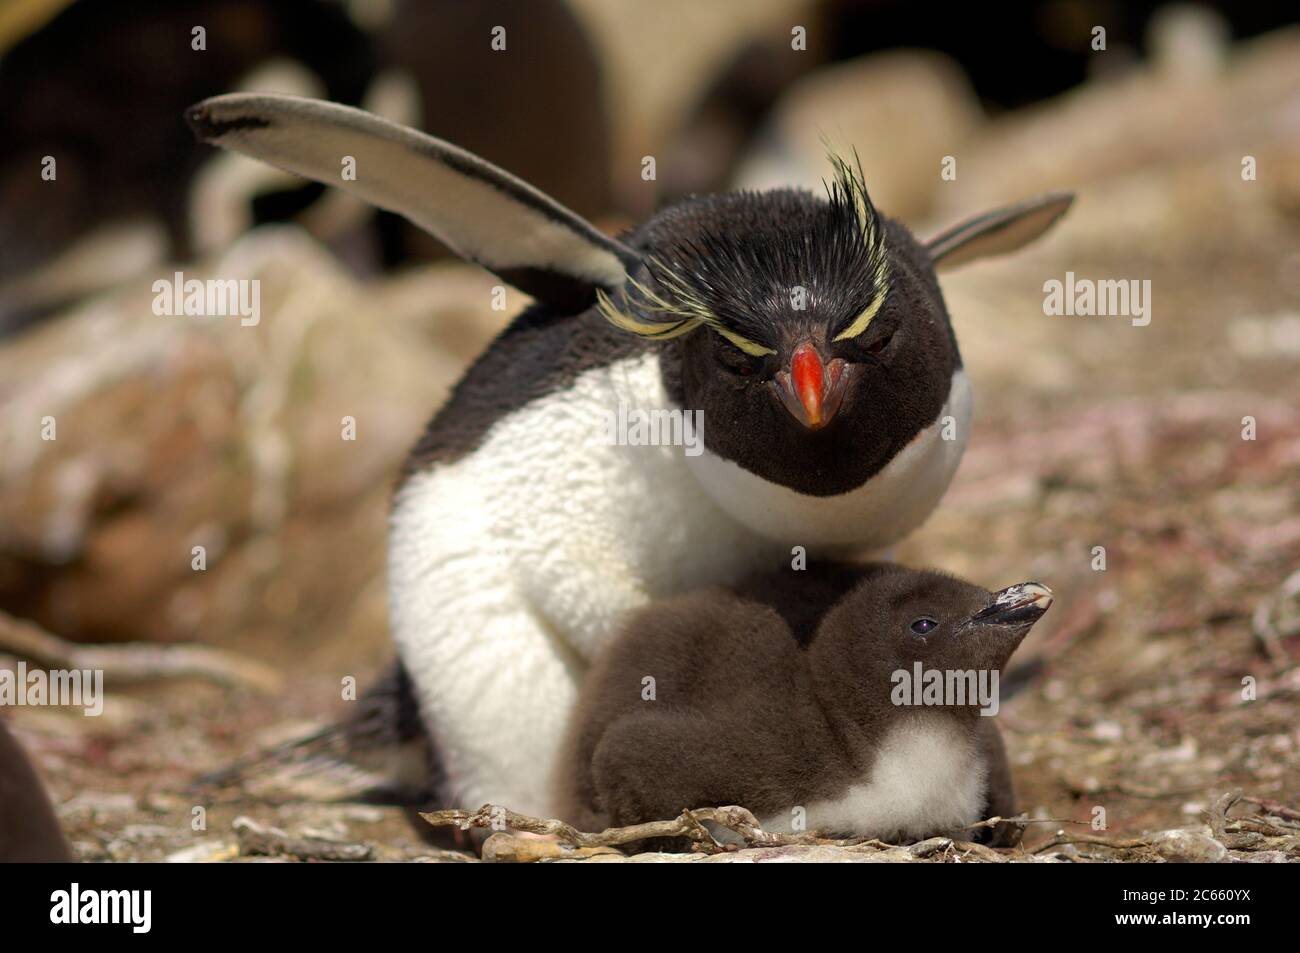 The rockhopper penguin (Eudyptes chrysocome) can - at the first glance - be confused with the other species of crested penguins, but the only thin, light yellow supercilium (eyebrow) which does not fuse on the forehead, and the bright red eyes are distinctive. Stock Photo